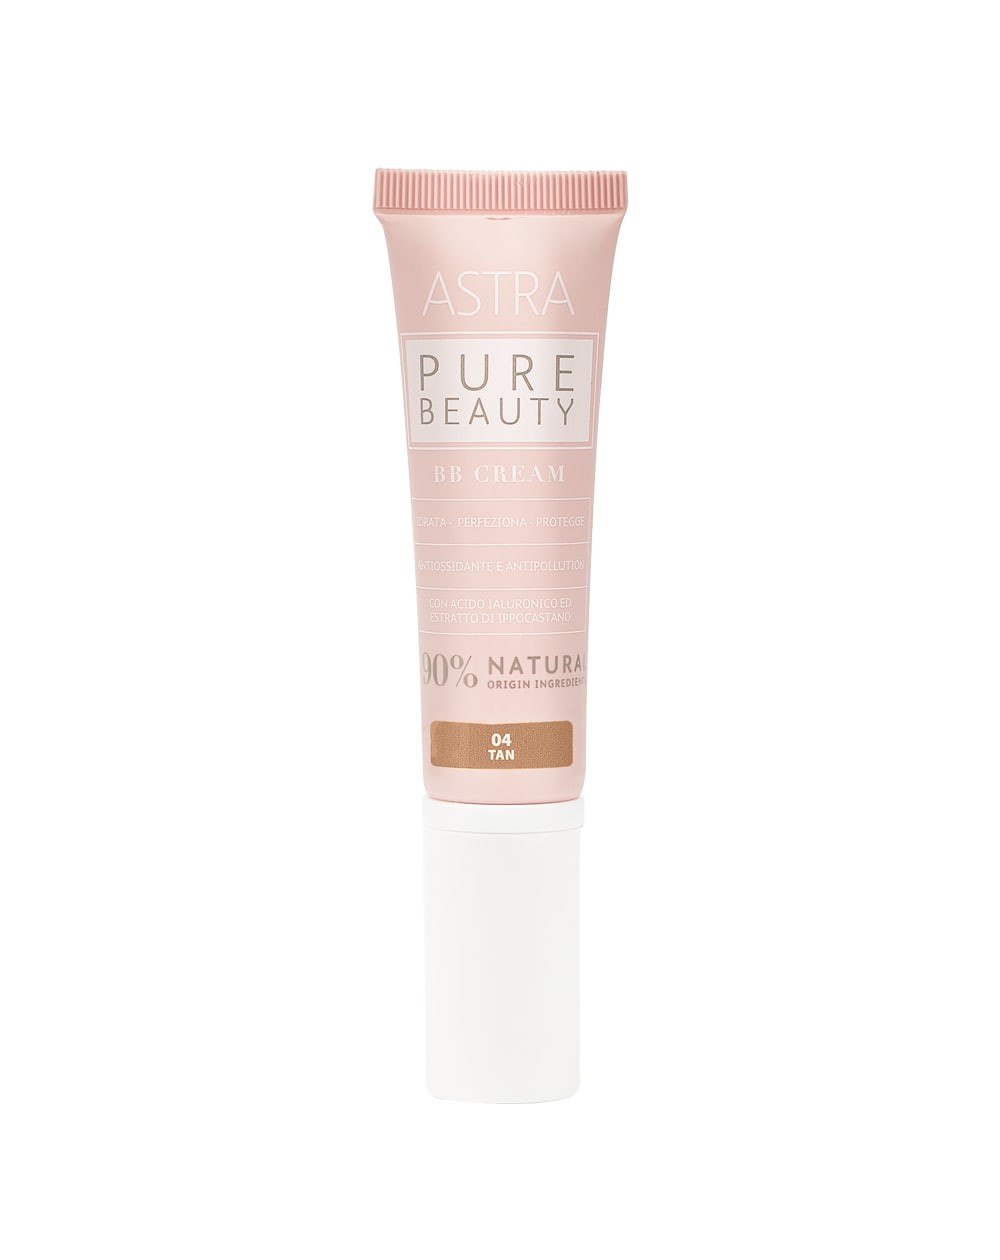 BB CREAM Astra Pure Beauty n. 04 Tan | RossoLacca